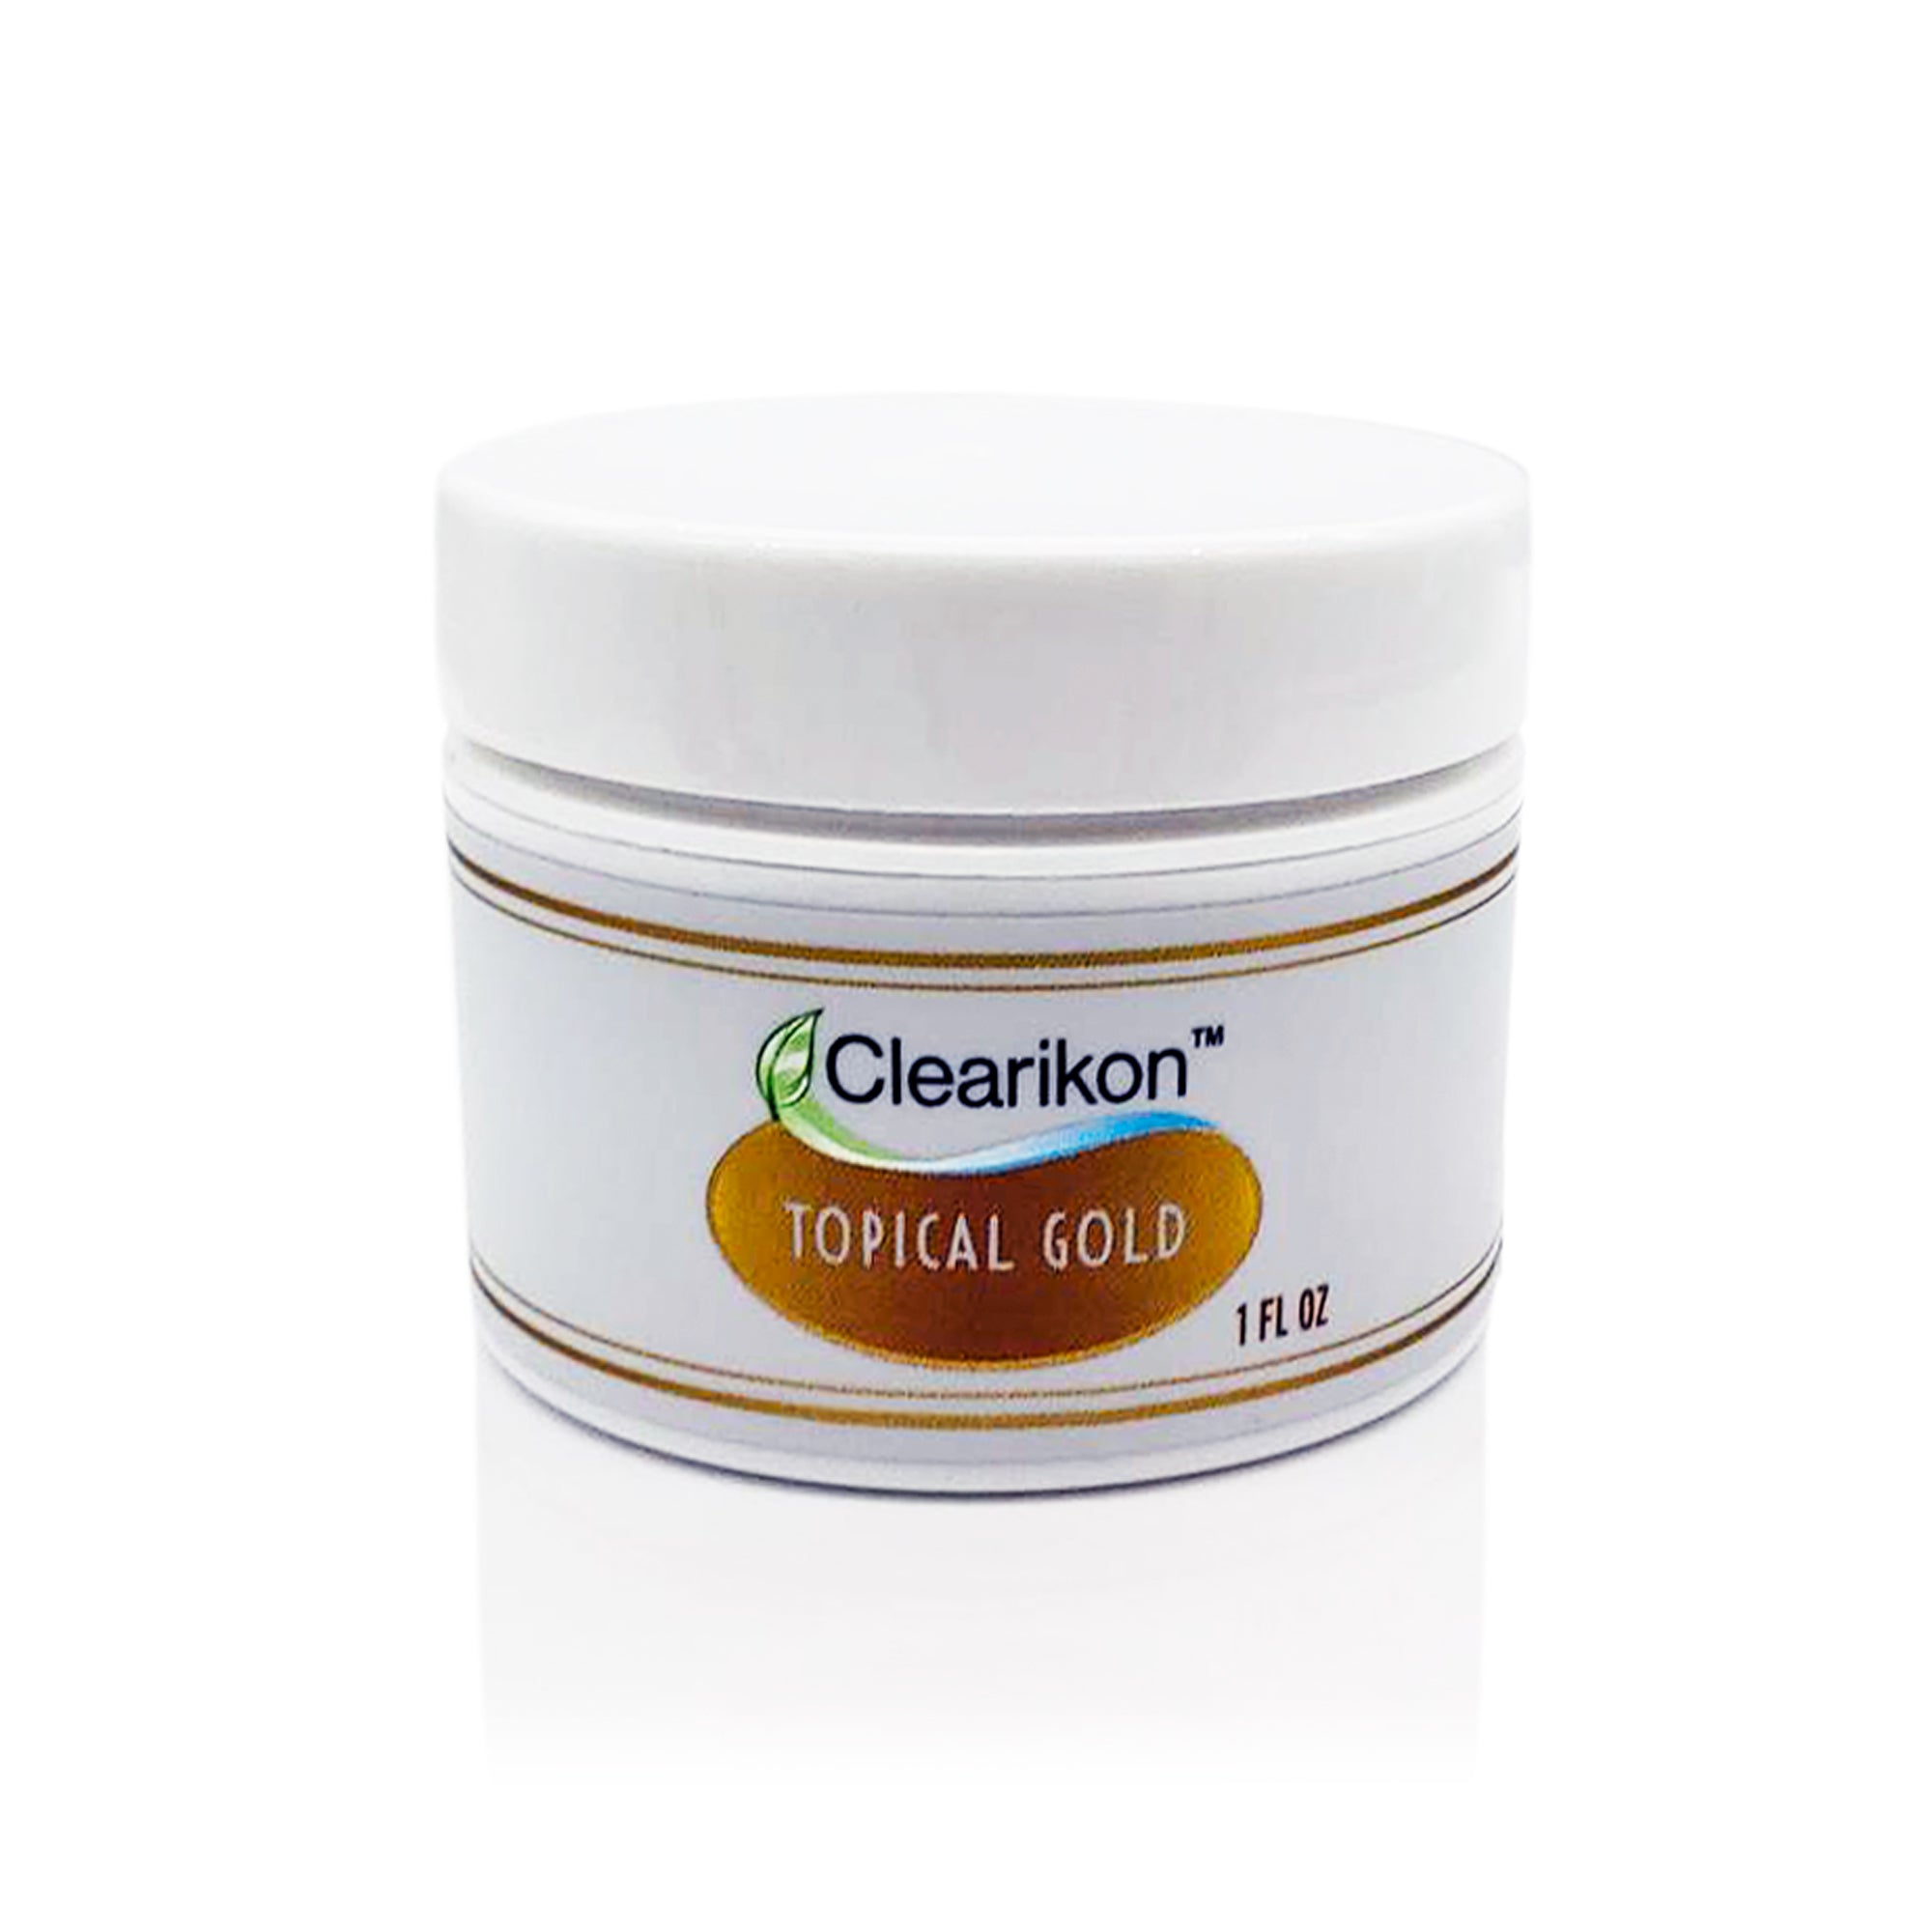 Shows Topical Gold product container for natural skin rejuvenation and healing